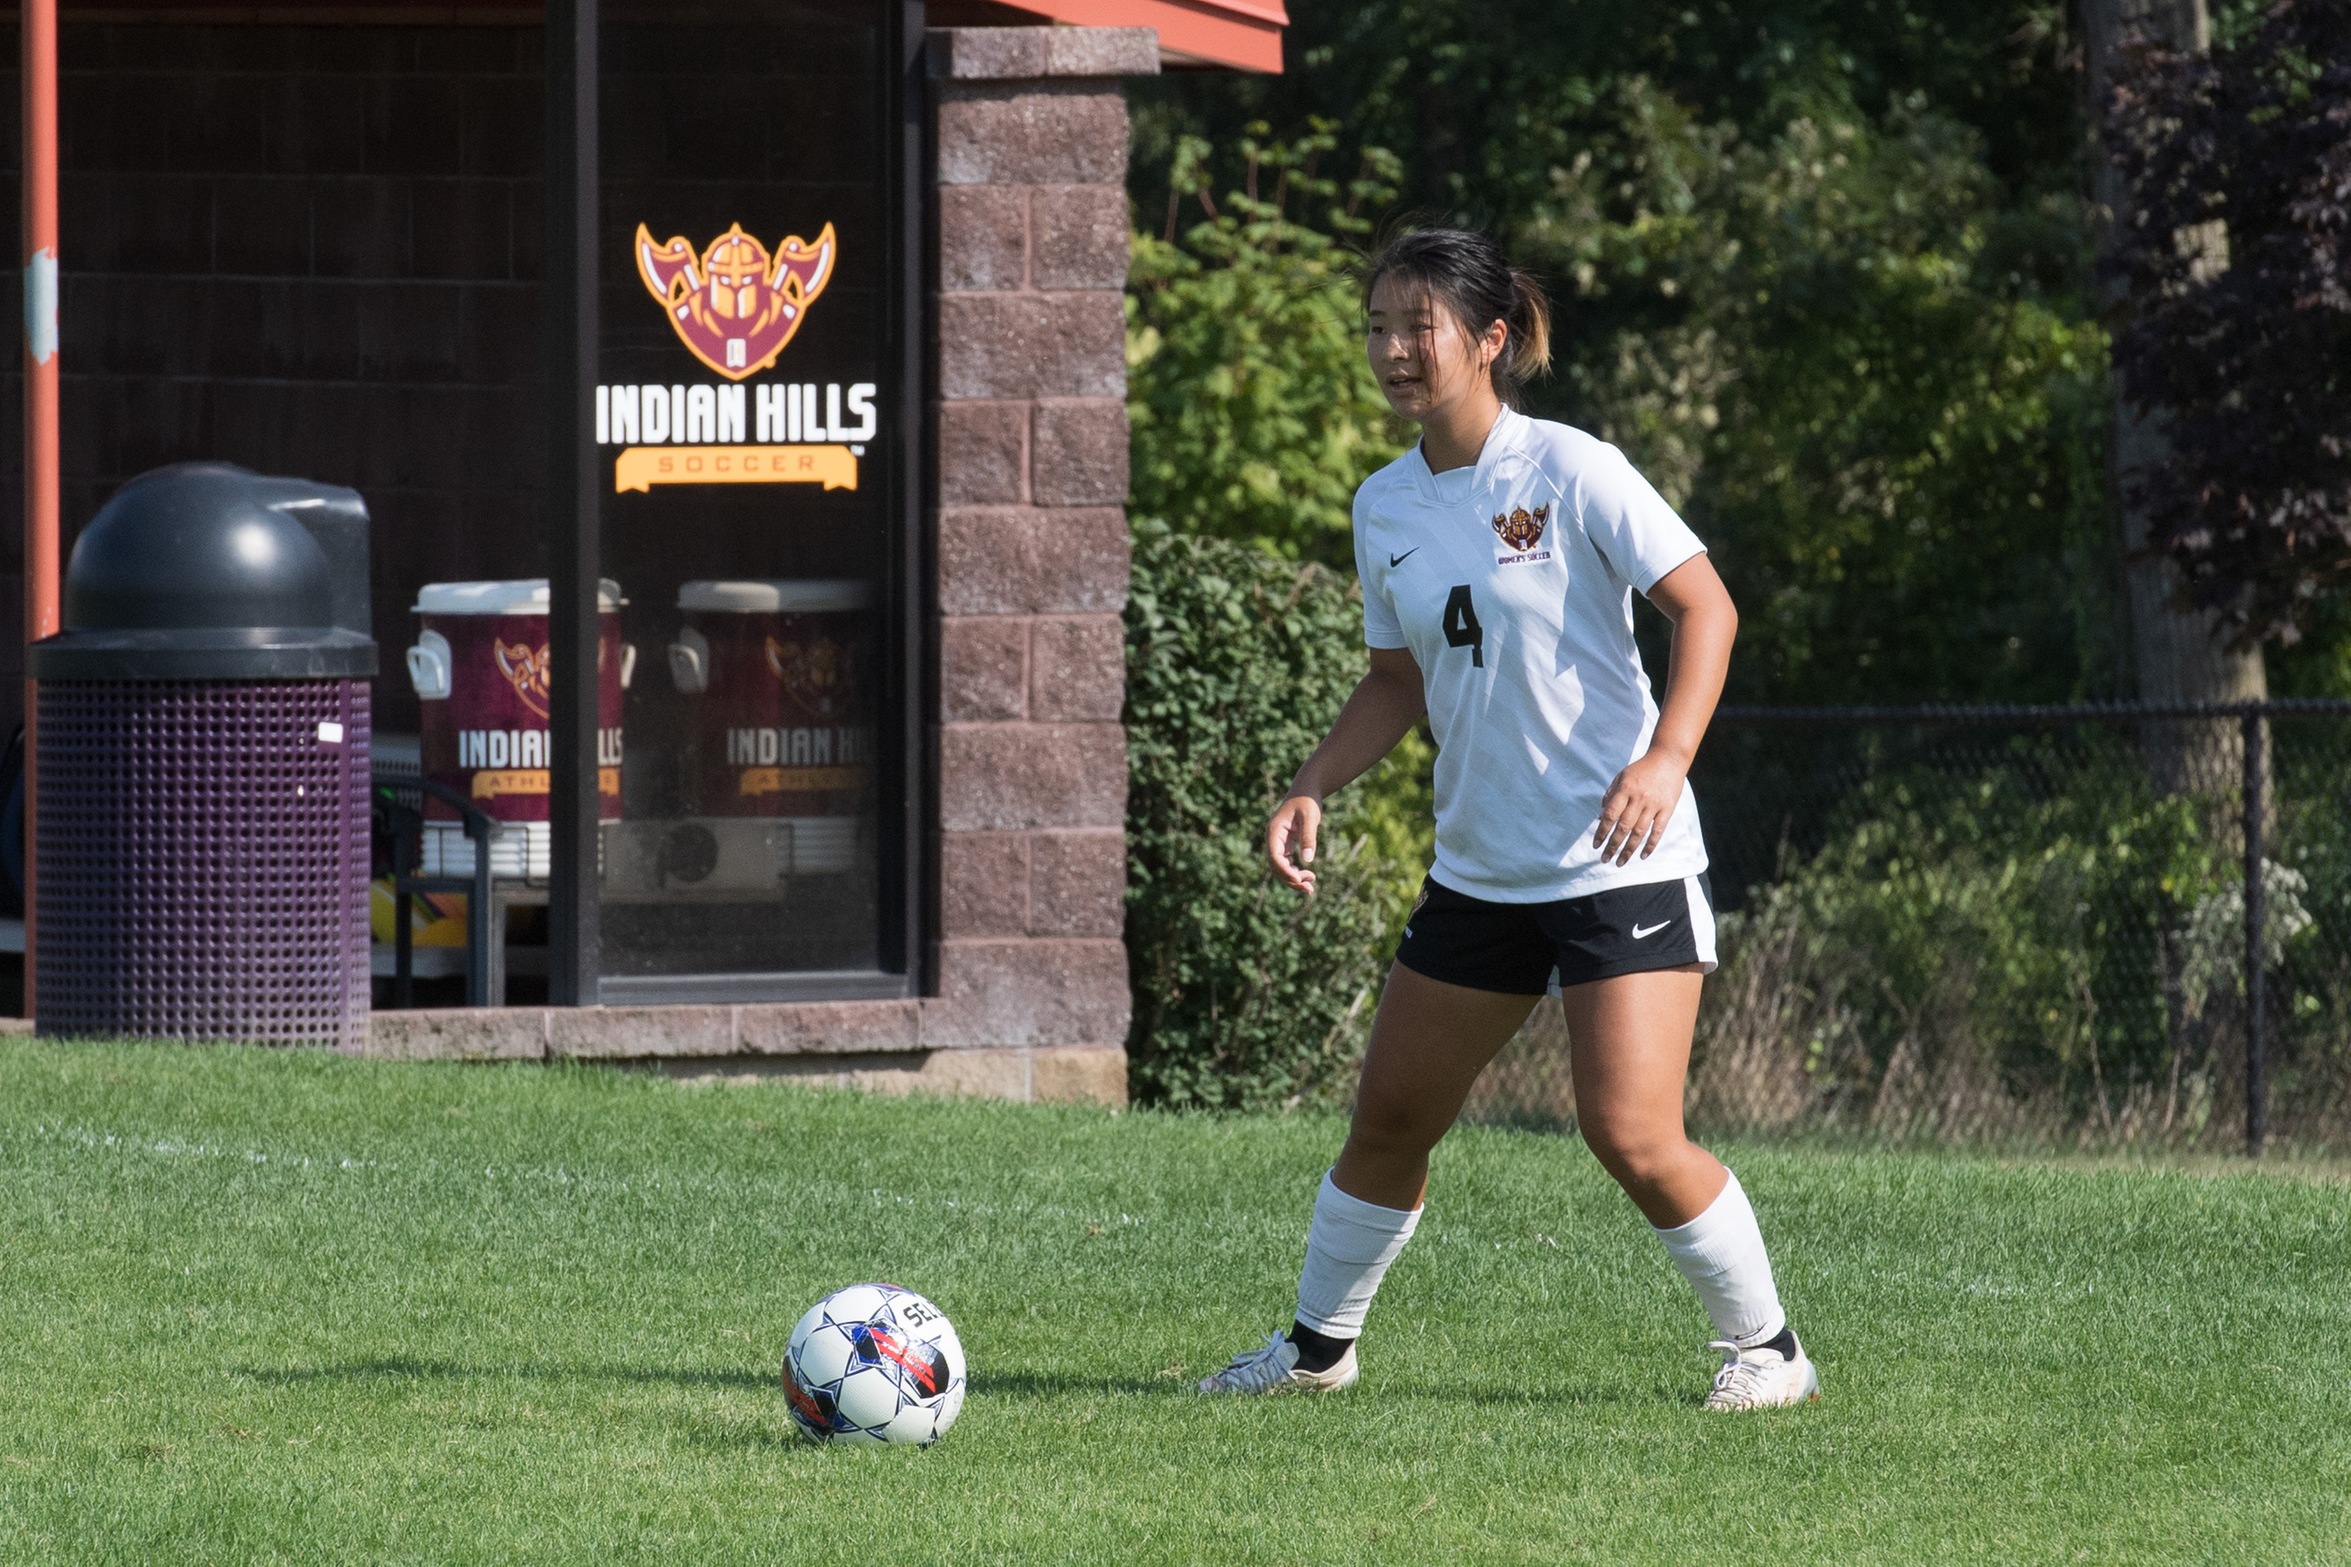 WARRIORS WIN ICCAC OPENER 2-1 OVER TRITONS